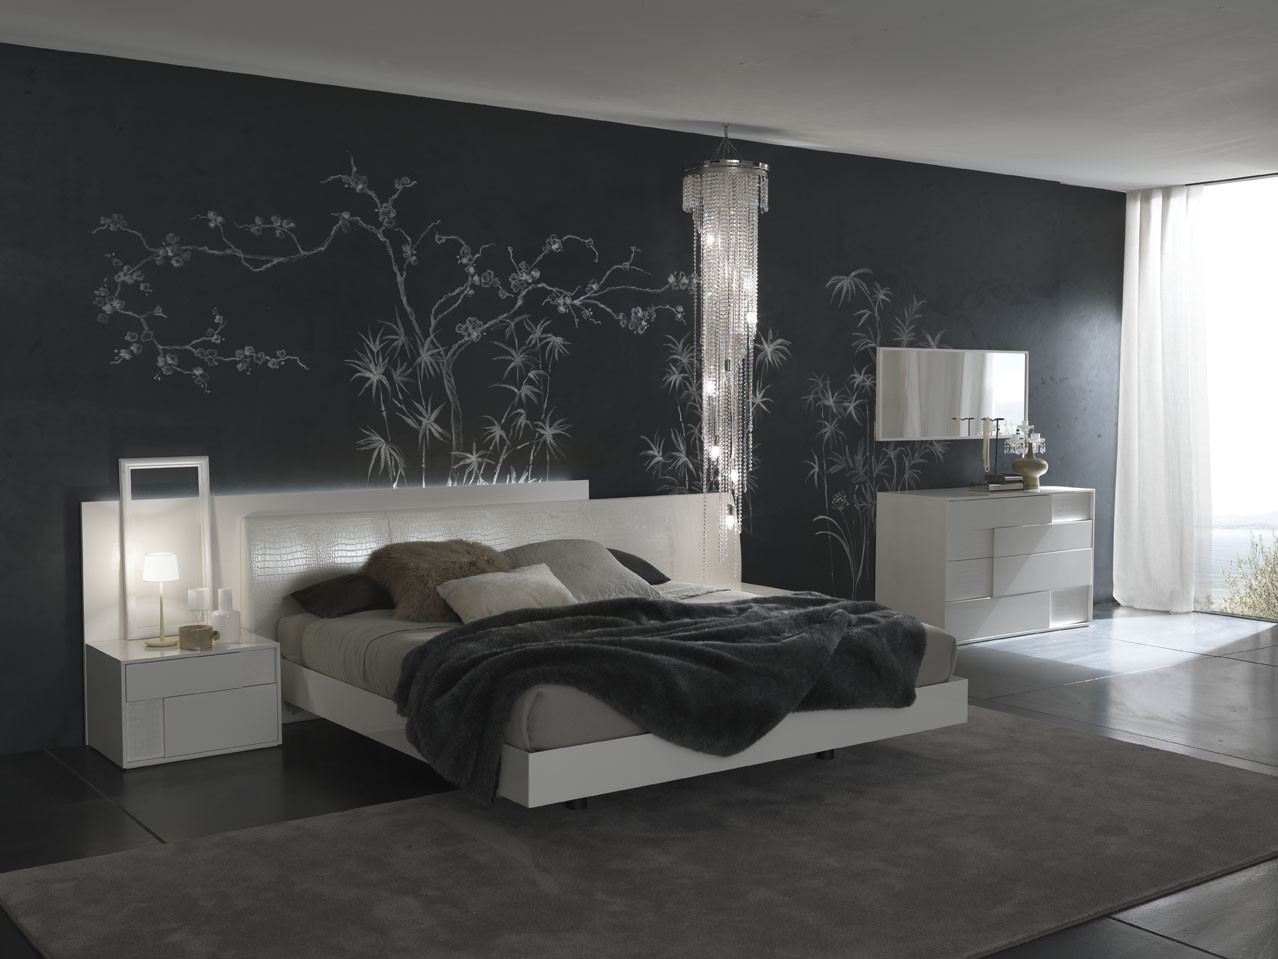 Bedroom Wall Art Ideas
 Bedroom Decorating Ideas from Evinco